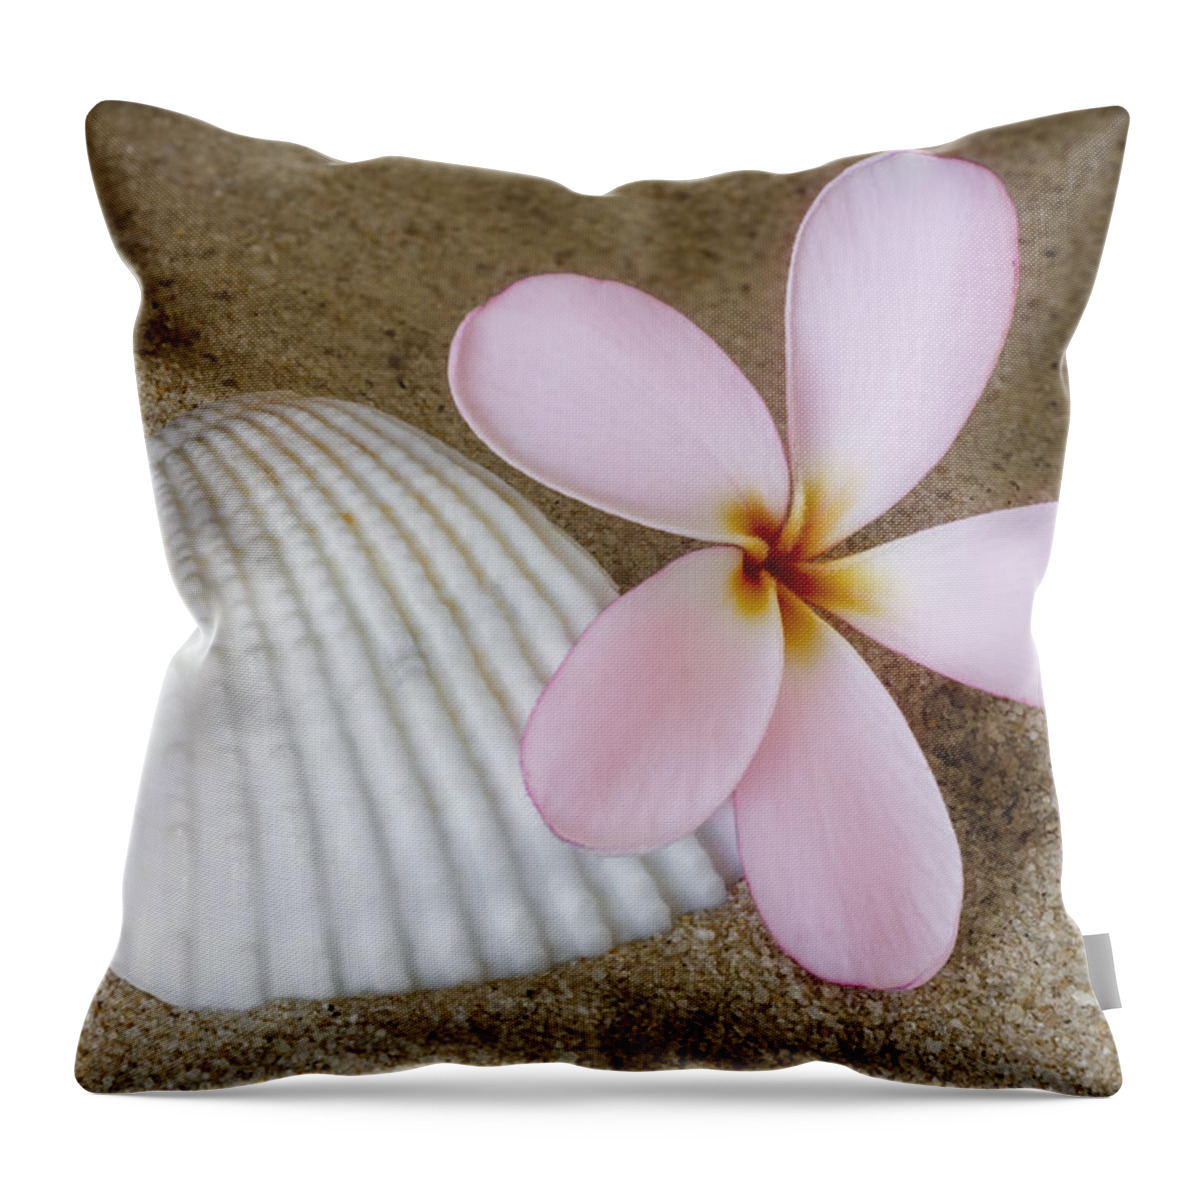 Plumeria Throw Pillow featuring the photograph Plumeria Flower And Sea Shell by Susan Candelario